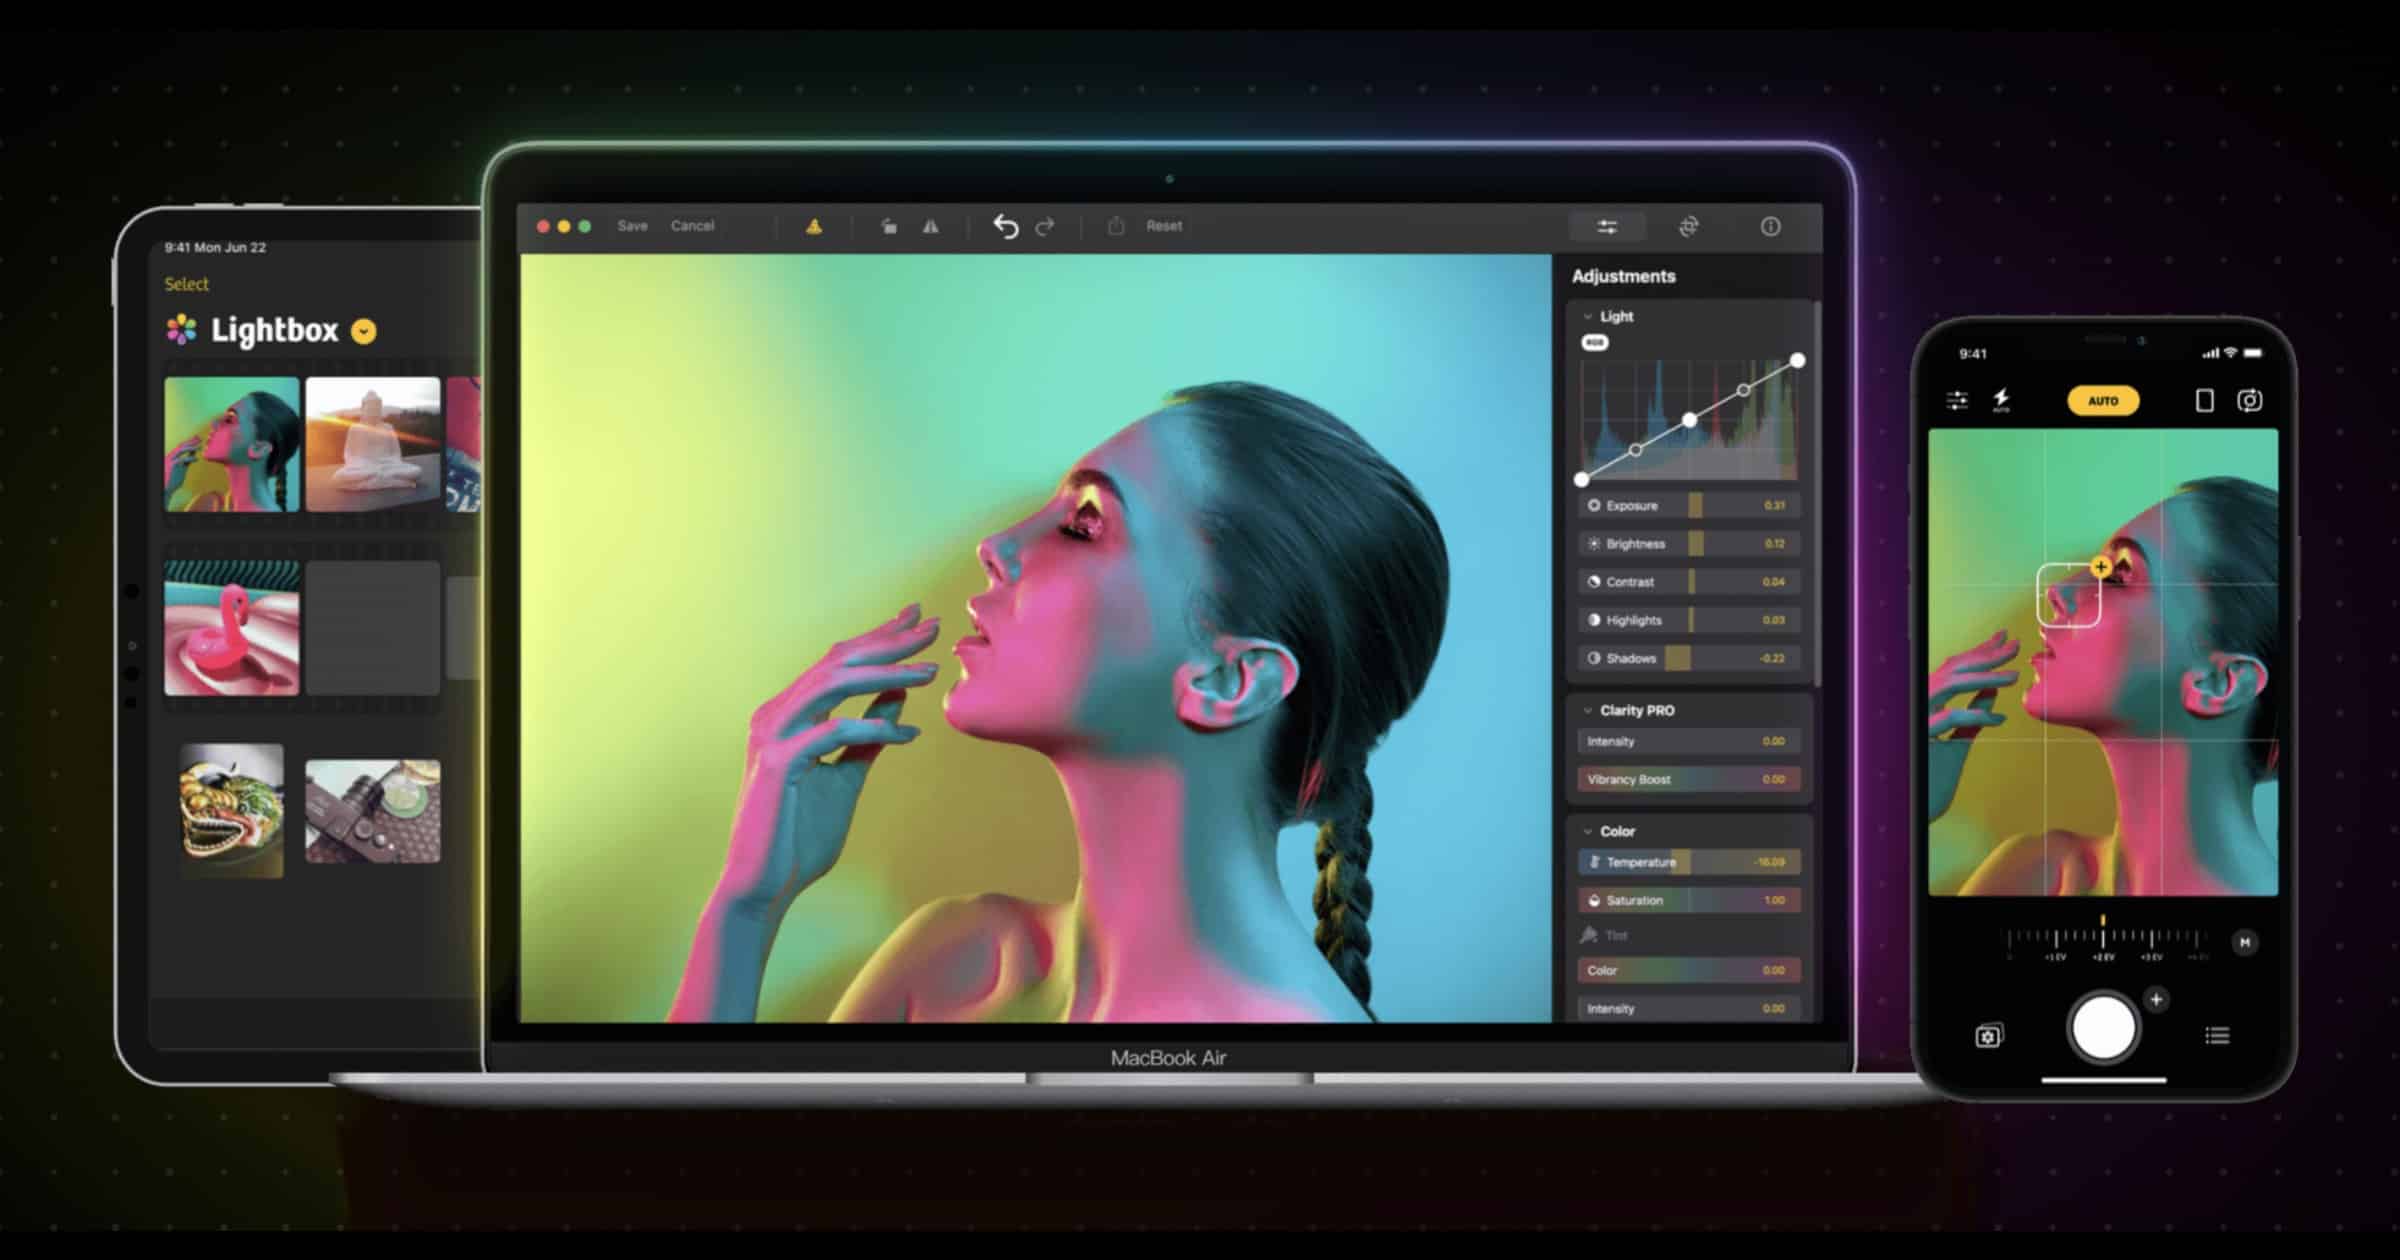 The Team Behind ‘Camera+‘ Launches ‘Camera+ Studio’ for Mac